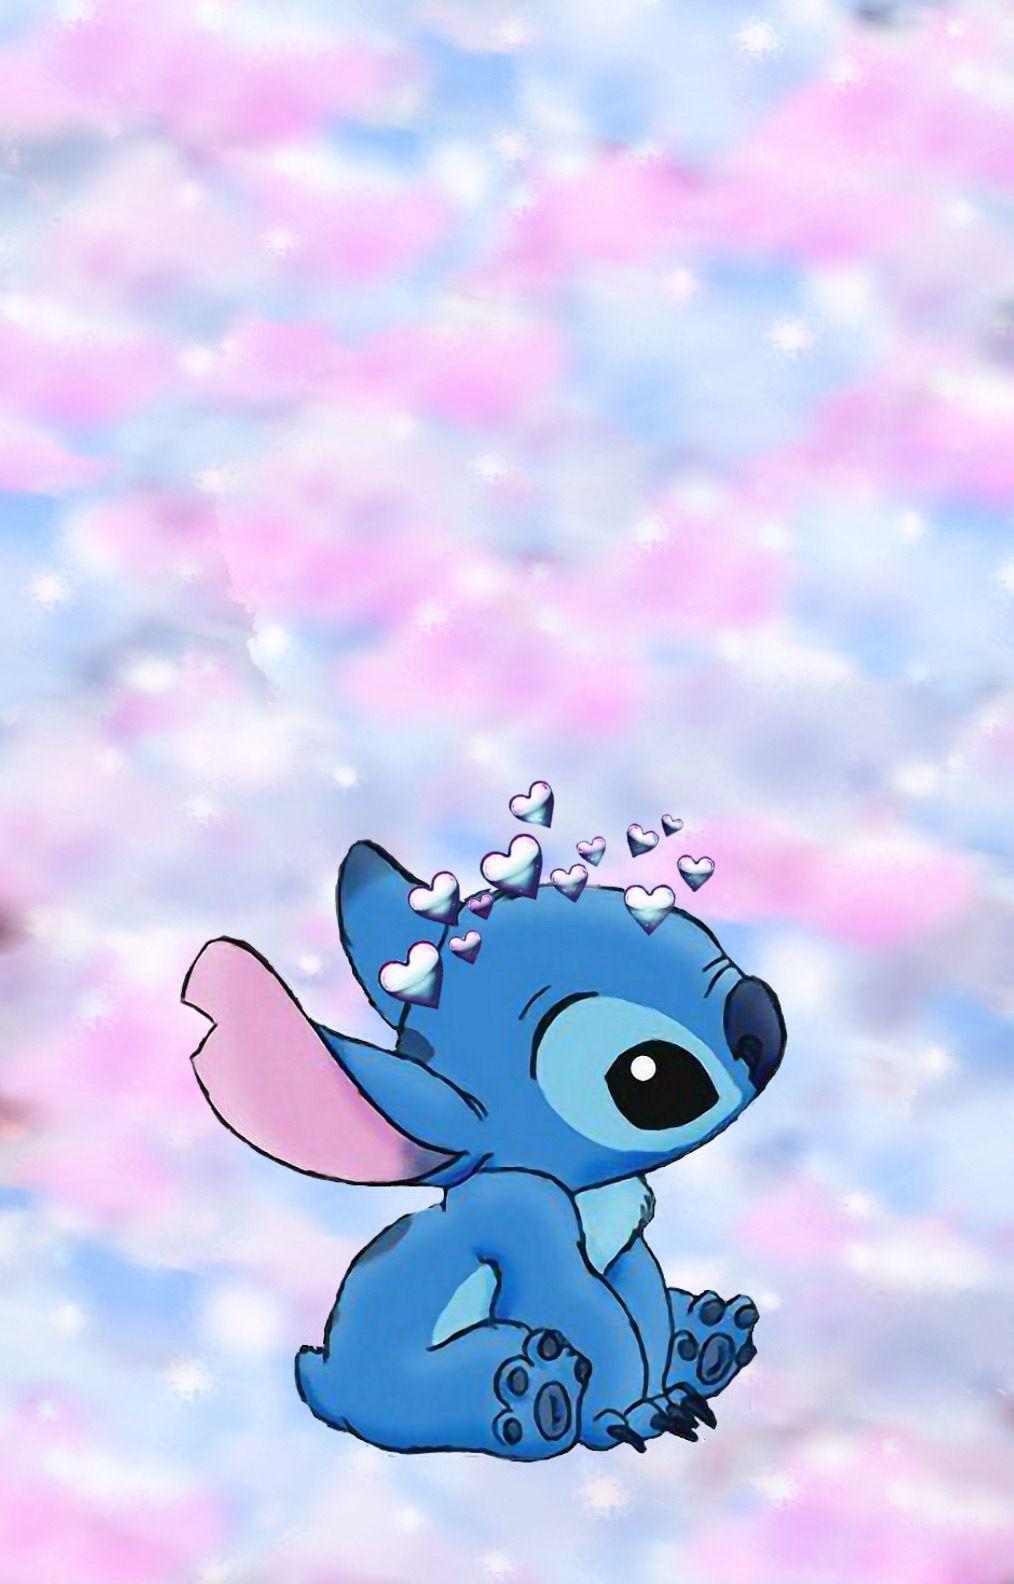 Aesthetic Tumblr Cute Stitch Wallpapers For Laptop - #aesthetic Collage ...